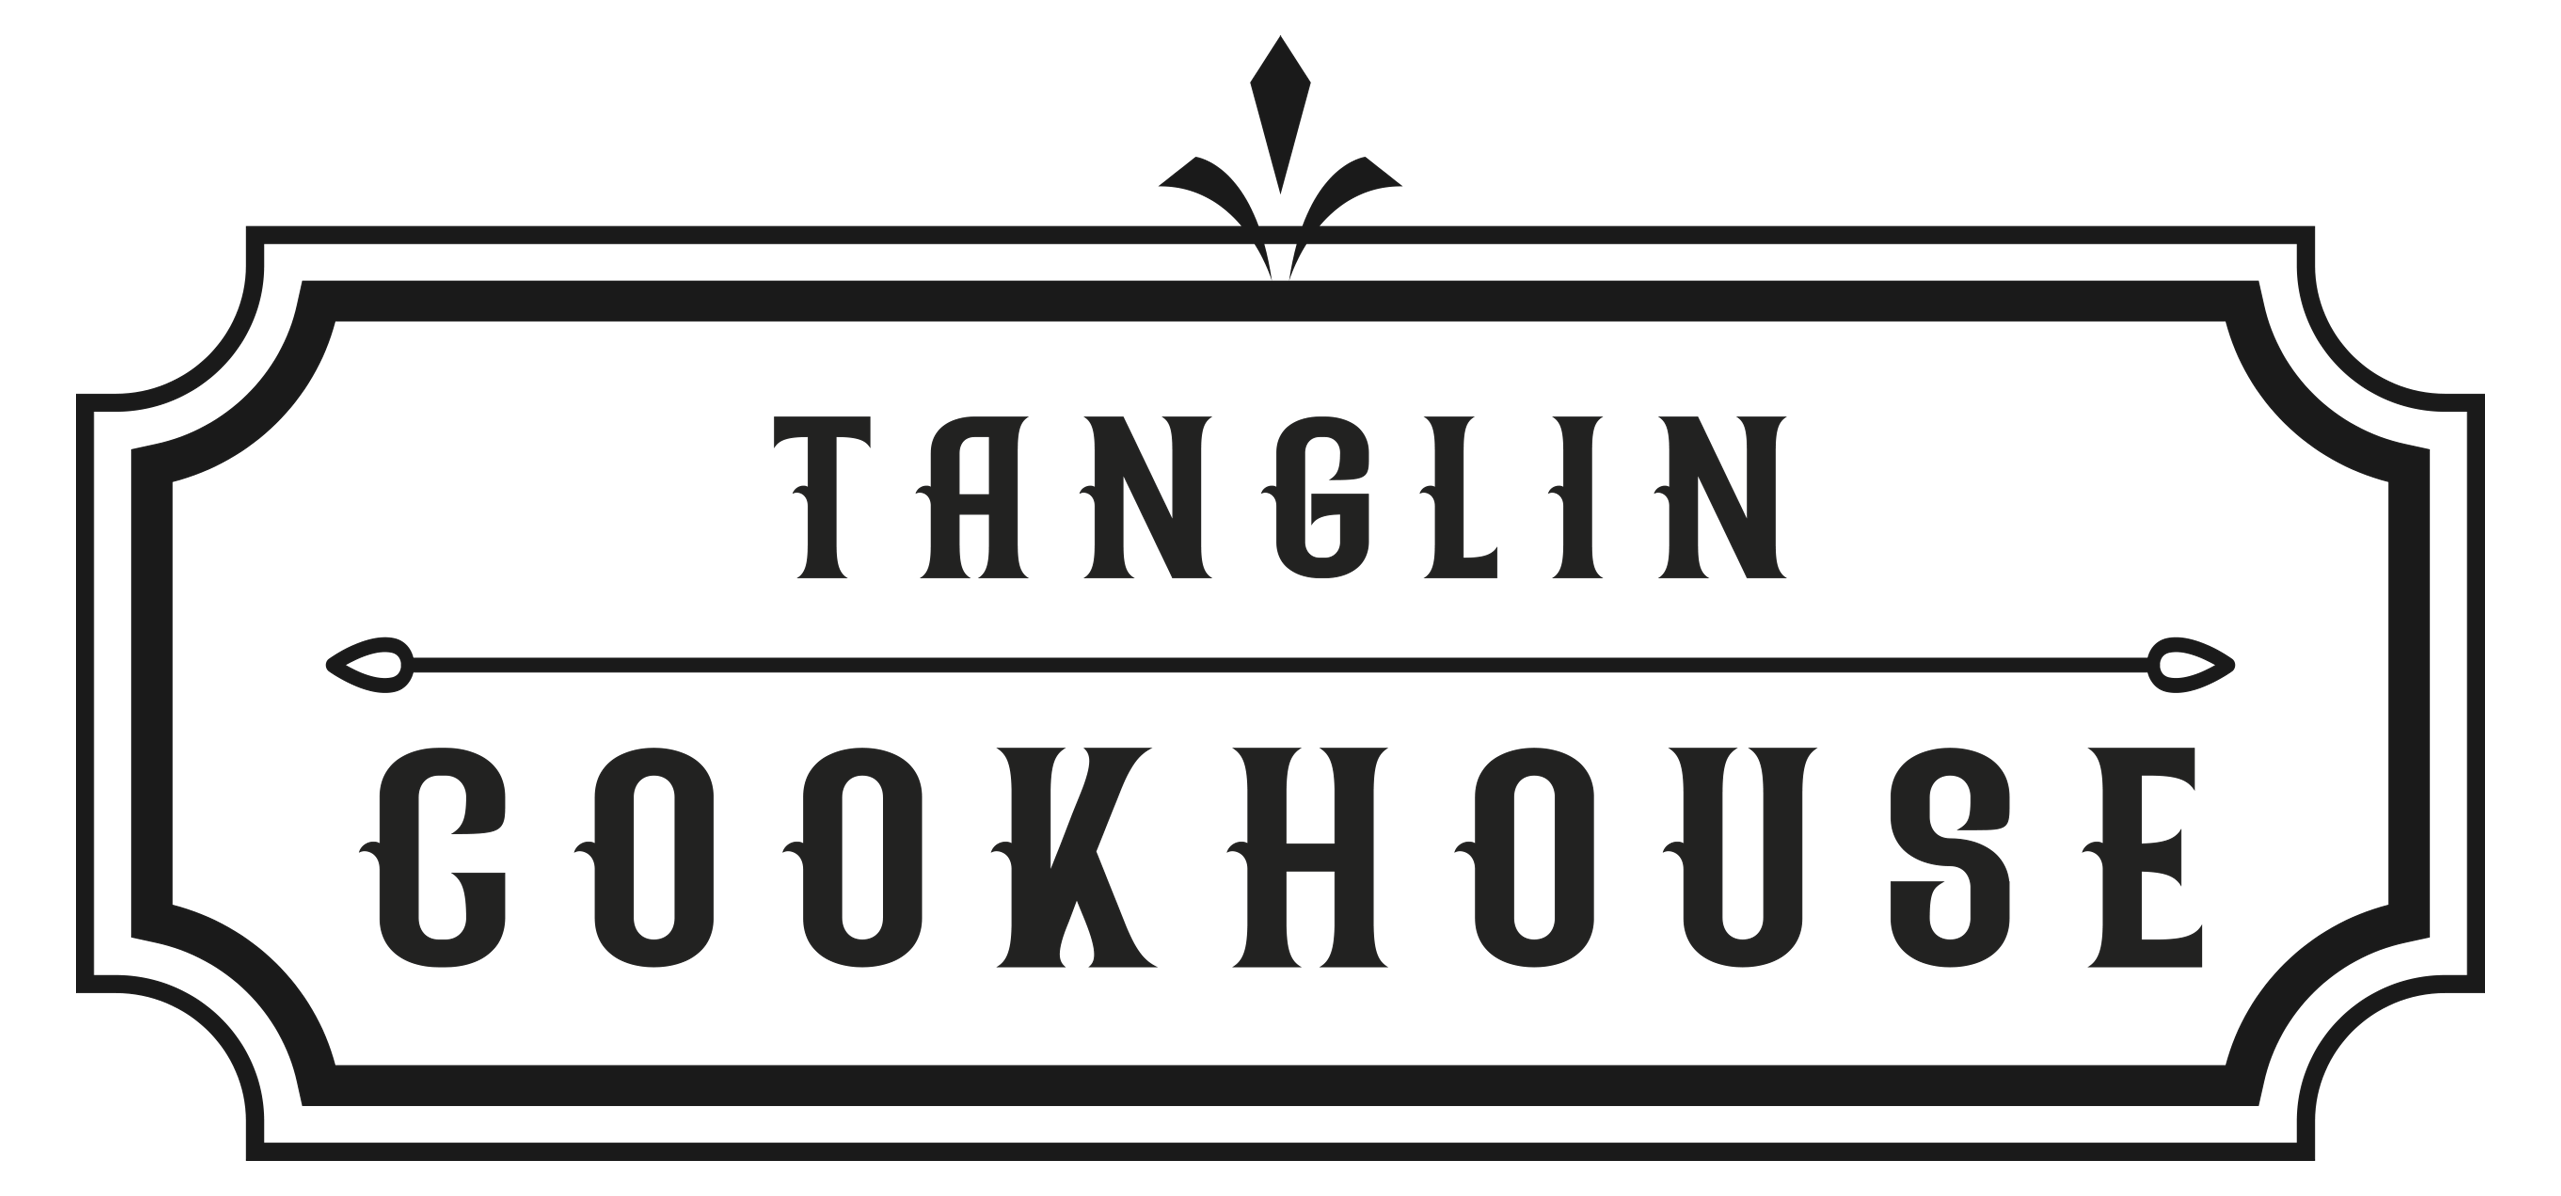 Tanglin Cookhouse